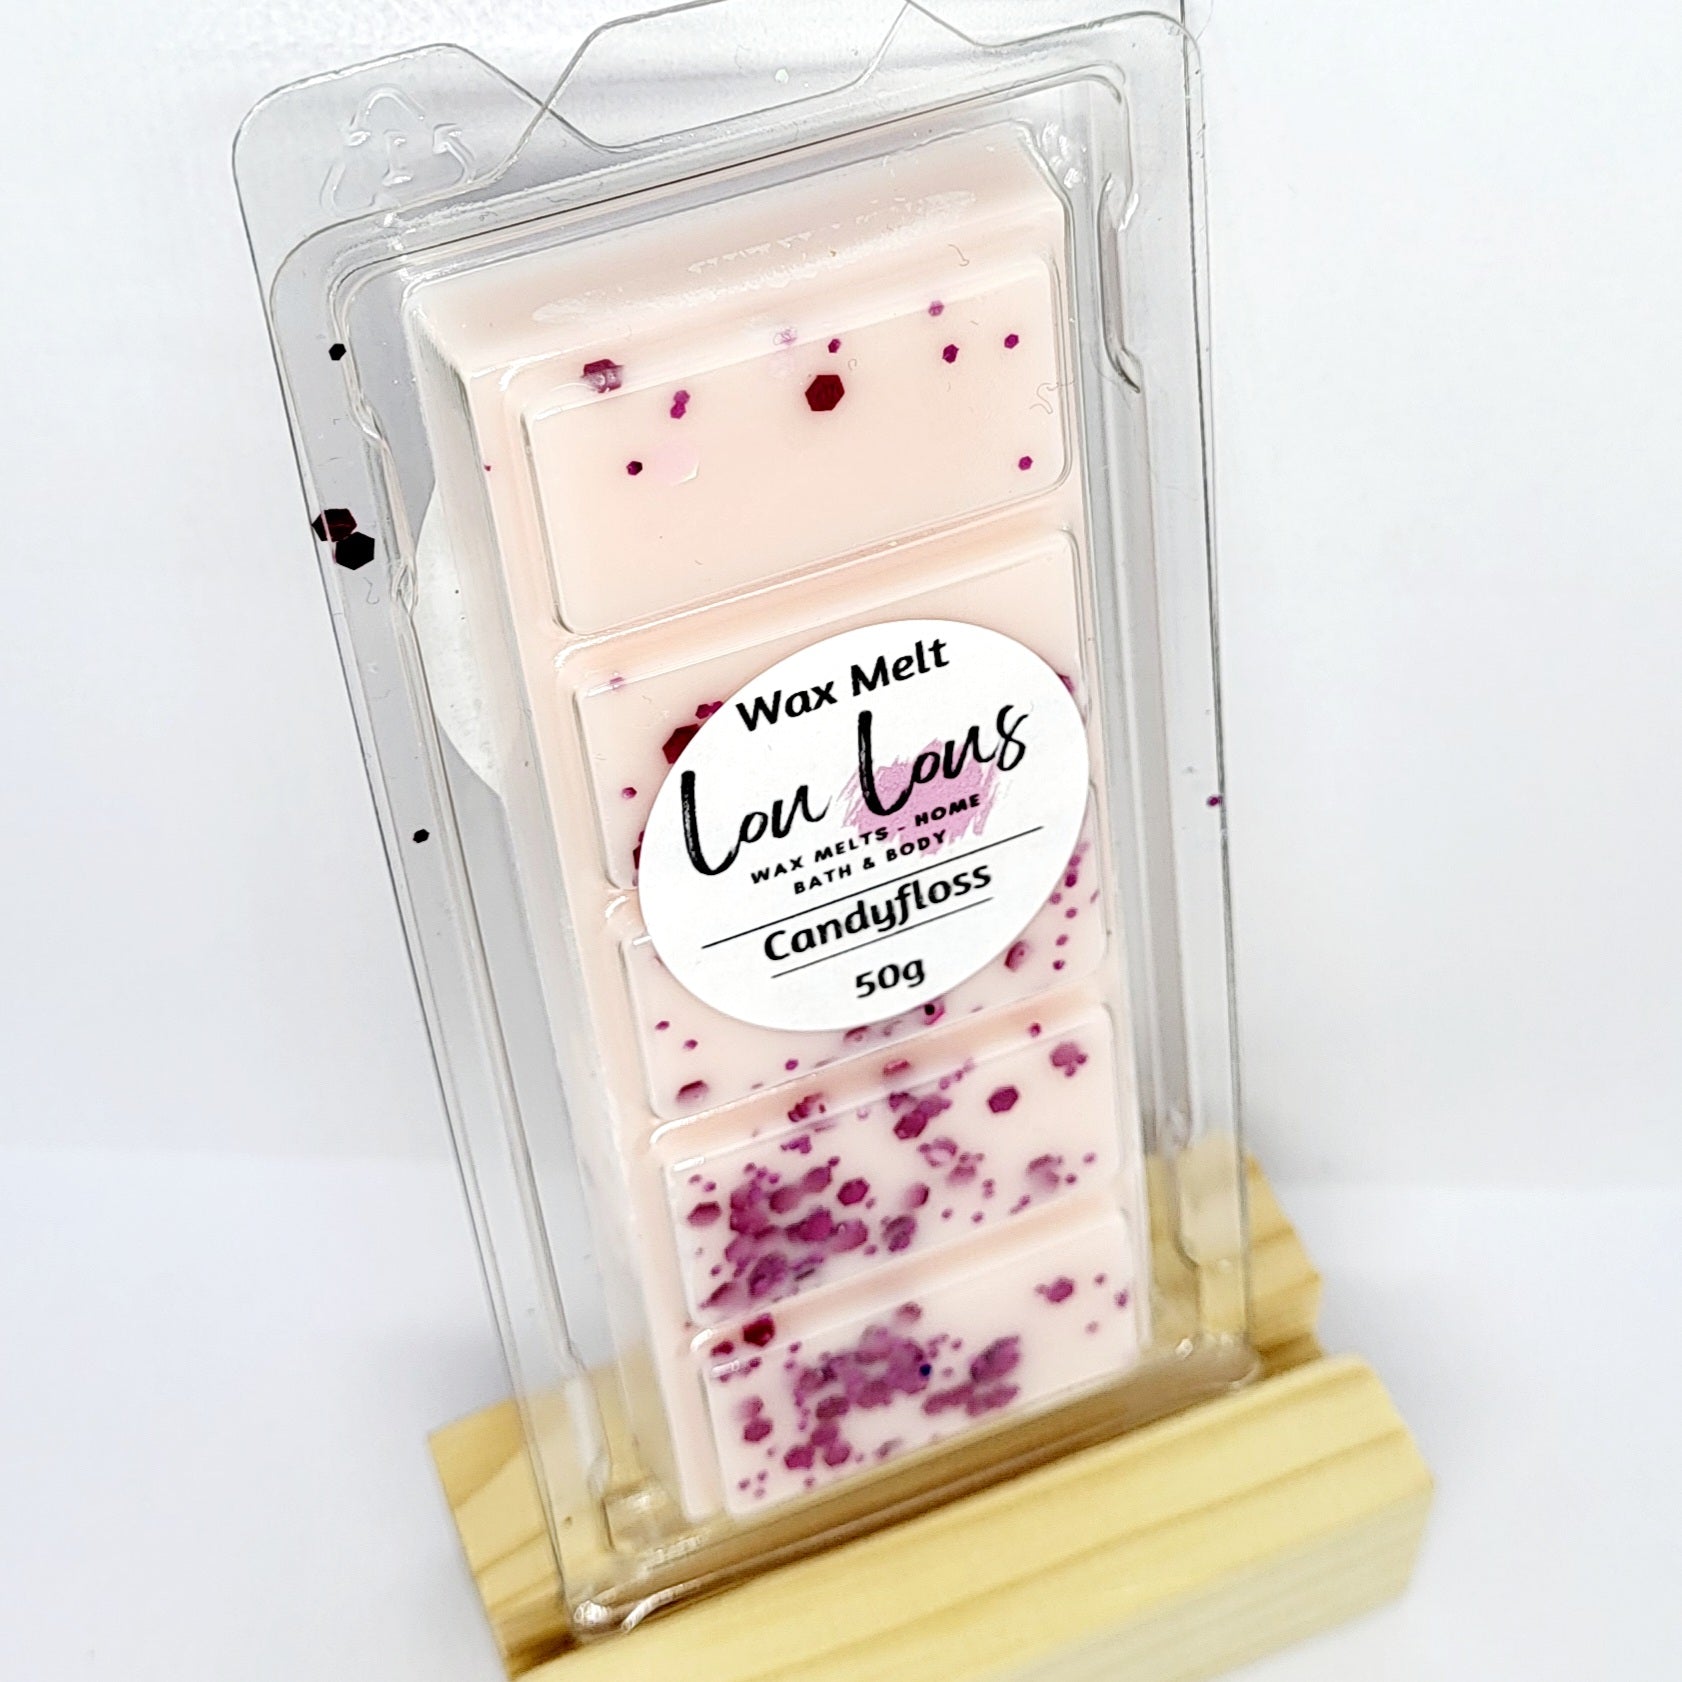 Wax melt snap bar scented in candyfloss